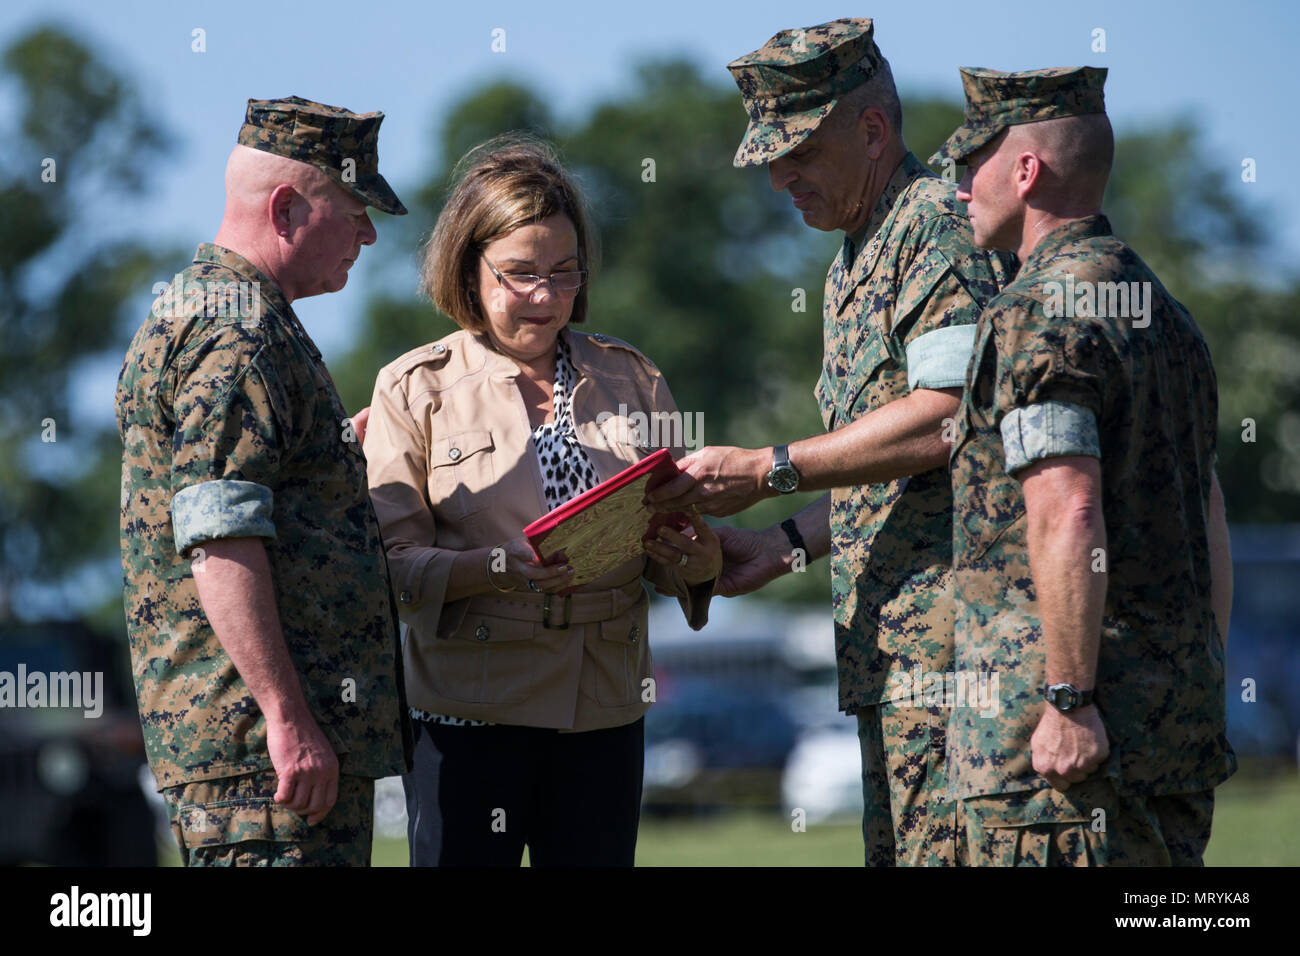 U.S. Marine Corps Maj. Gen. Walter L. Miller's wife, Mrs. Marcela Davila is awarded by Lt. Gen. Michael G. Dana, deputy commandant for installations and logistics, during a change of command ceremony on Camp Lejeune, N.C., July 14, 2017. During the ceremony, Miller relinquished his command as commanding general of II MEF to Lt. Gen. Robert F. Hedelund. (U.S. Marine Corps photo by Lance Cpl. Koby I. Saunders) Stock Photo